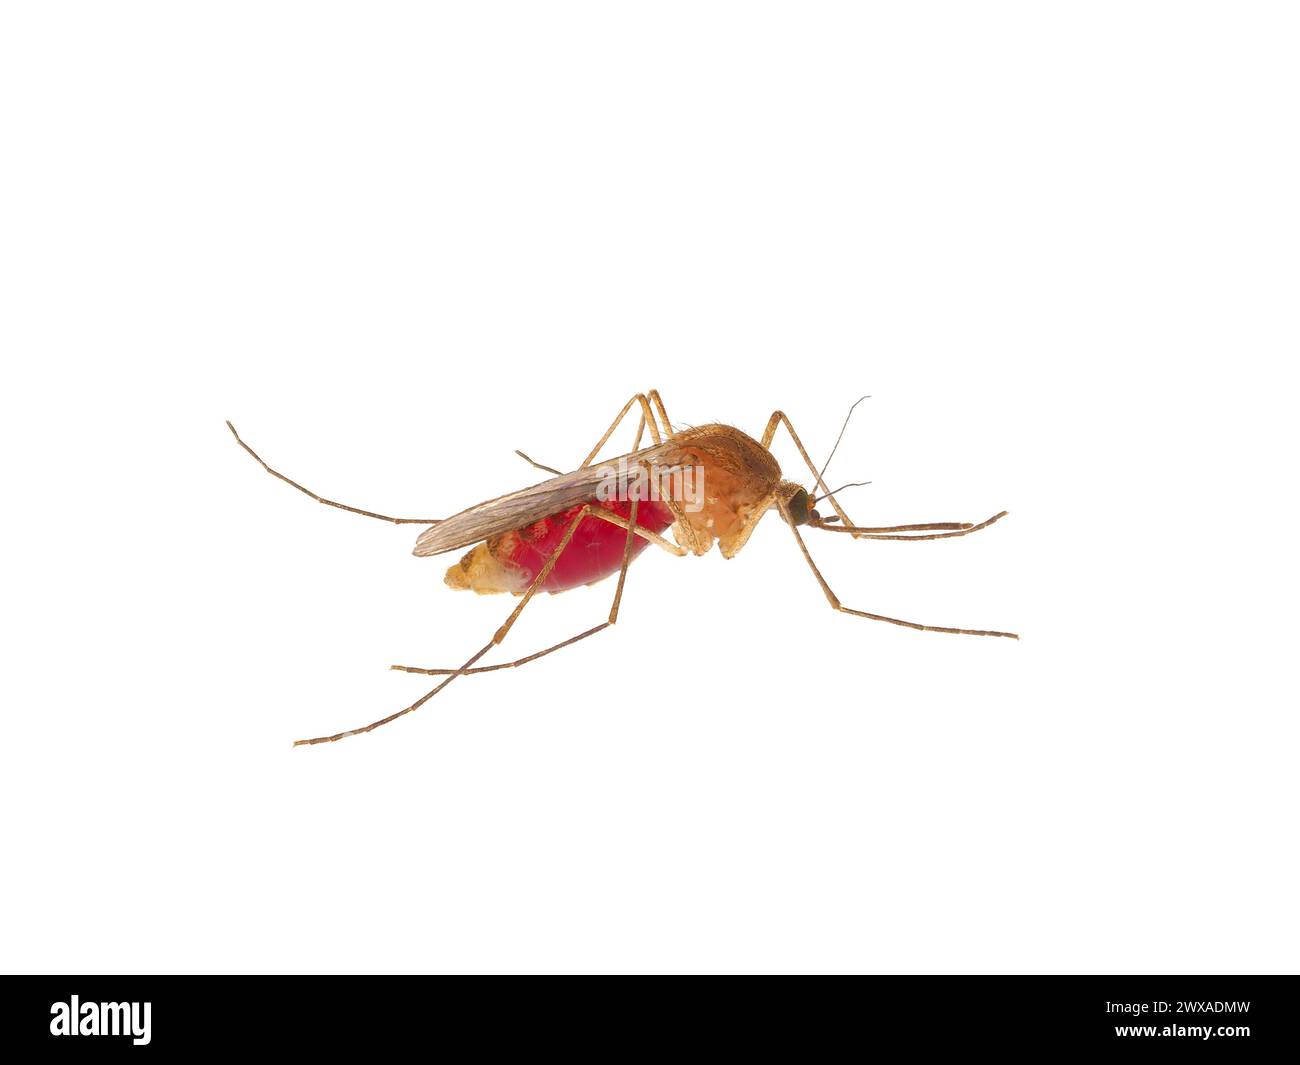 Inland floodwater mosquito full of blood isolated on white background, Aedes vexans Stock Photo